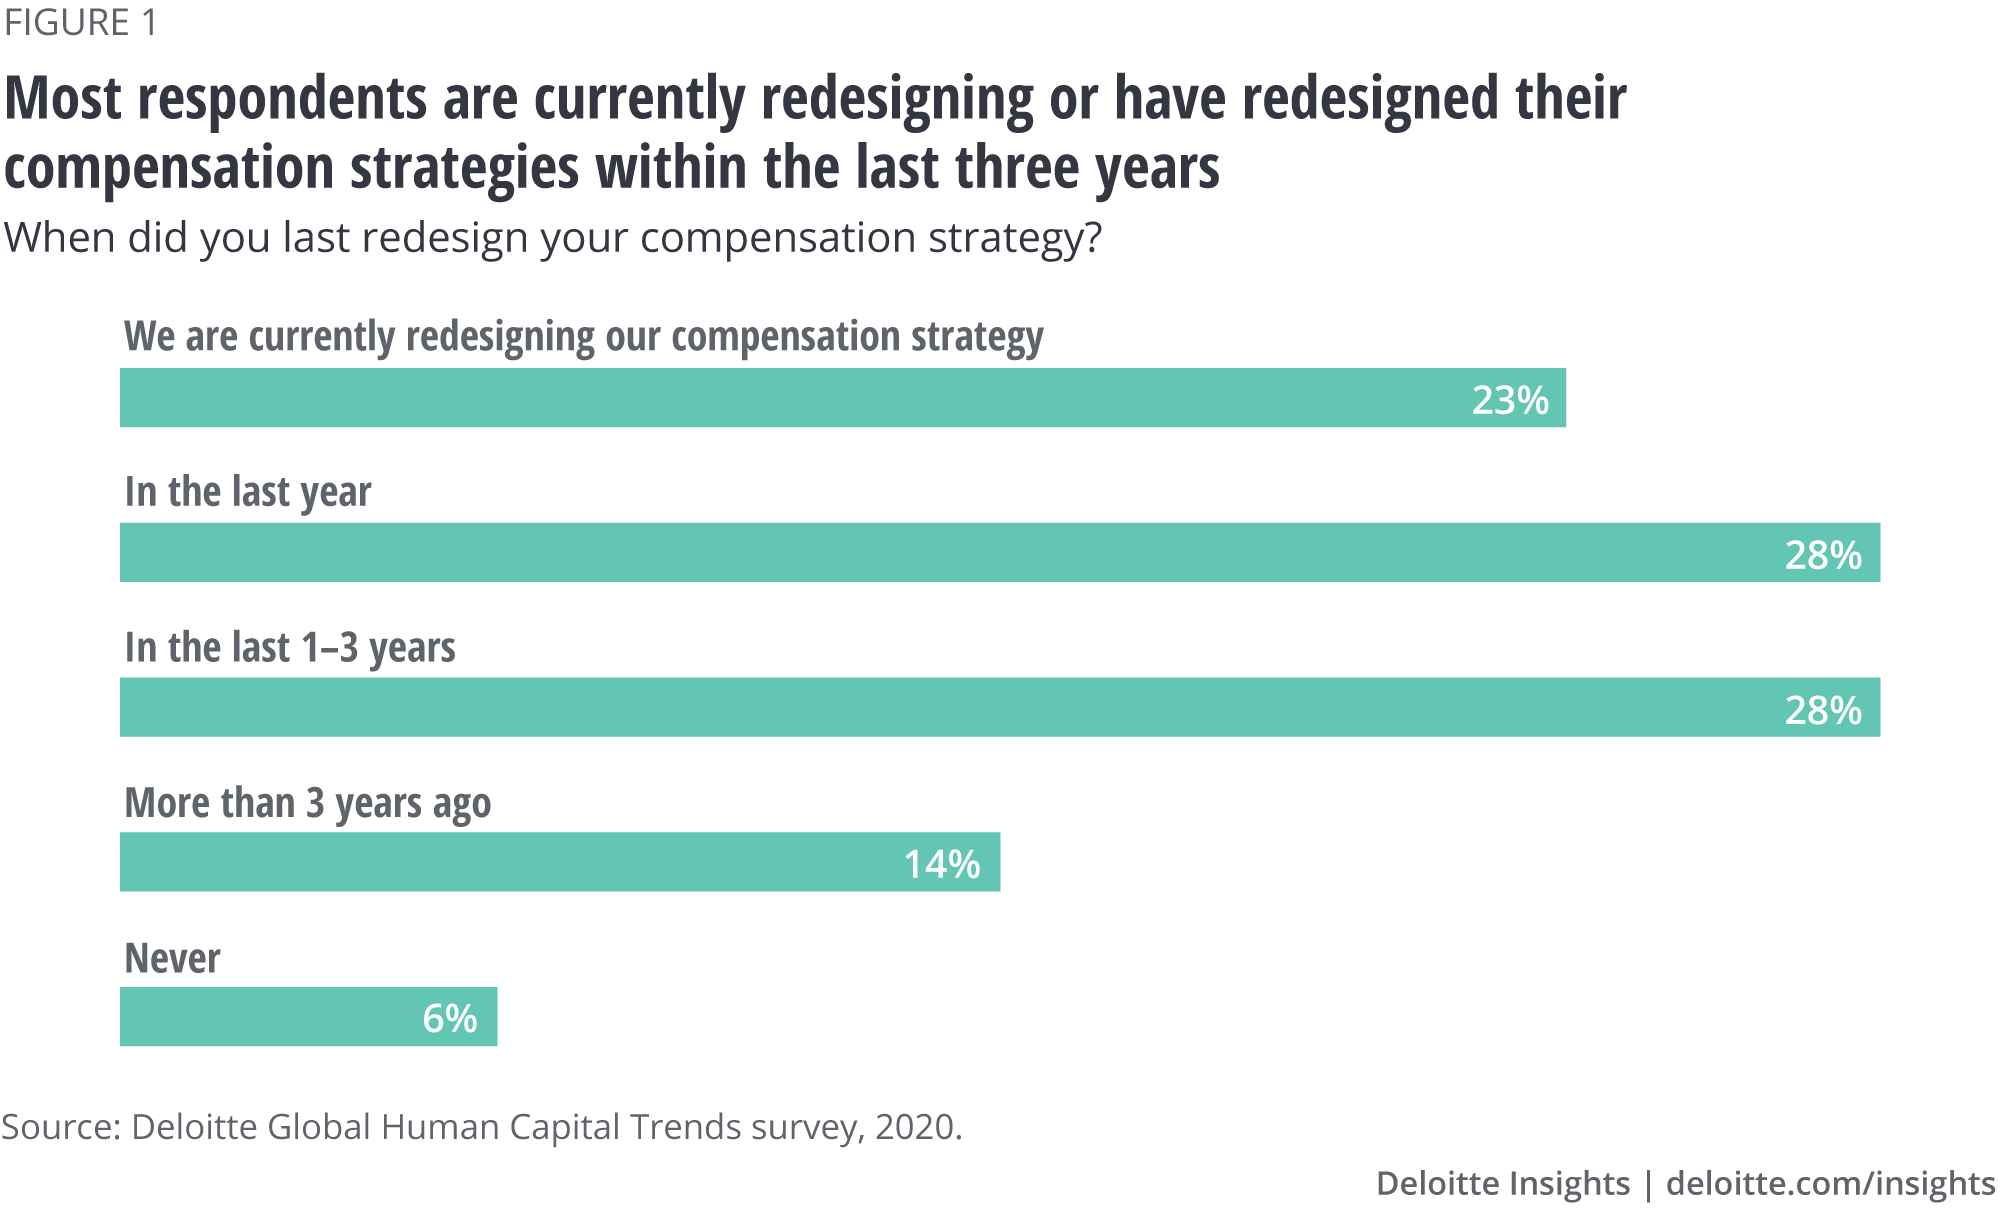 Most respondents are currently redesigning or have redesigned their compensation strategies within the last three years